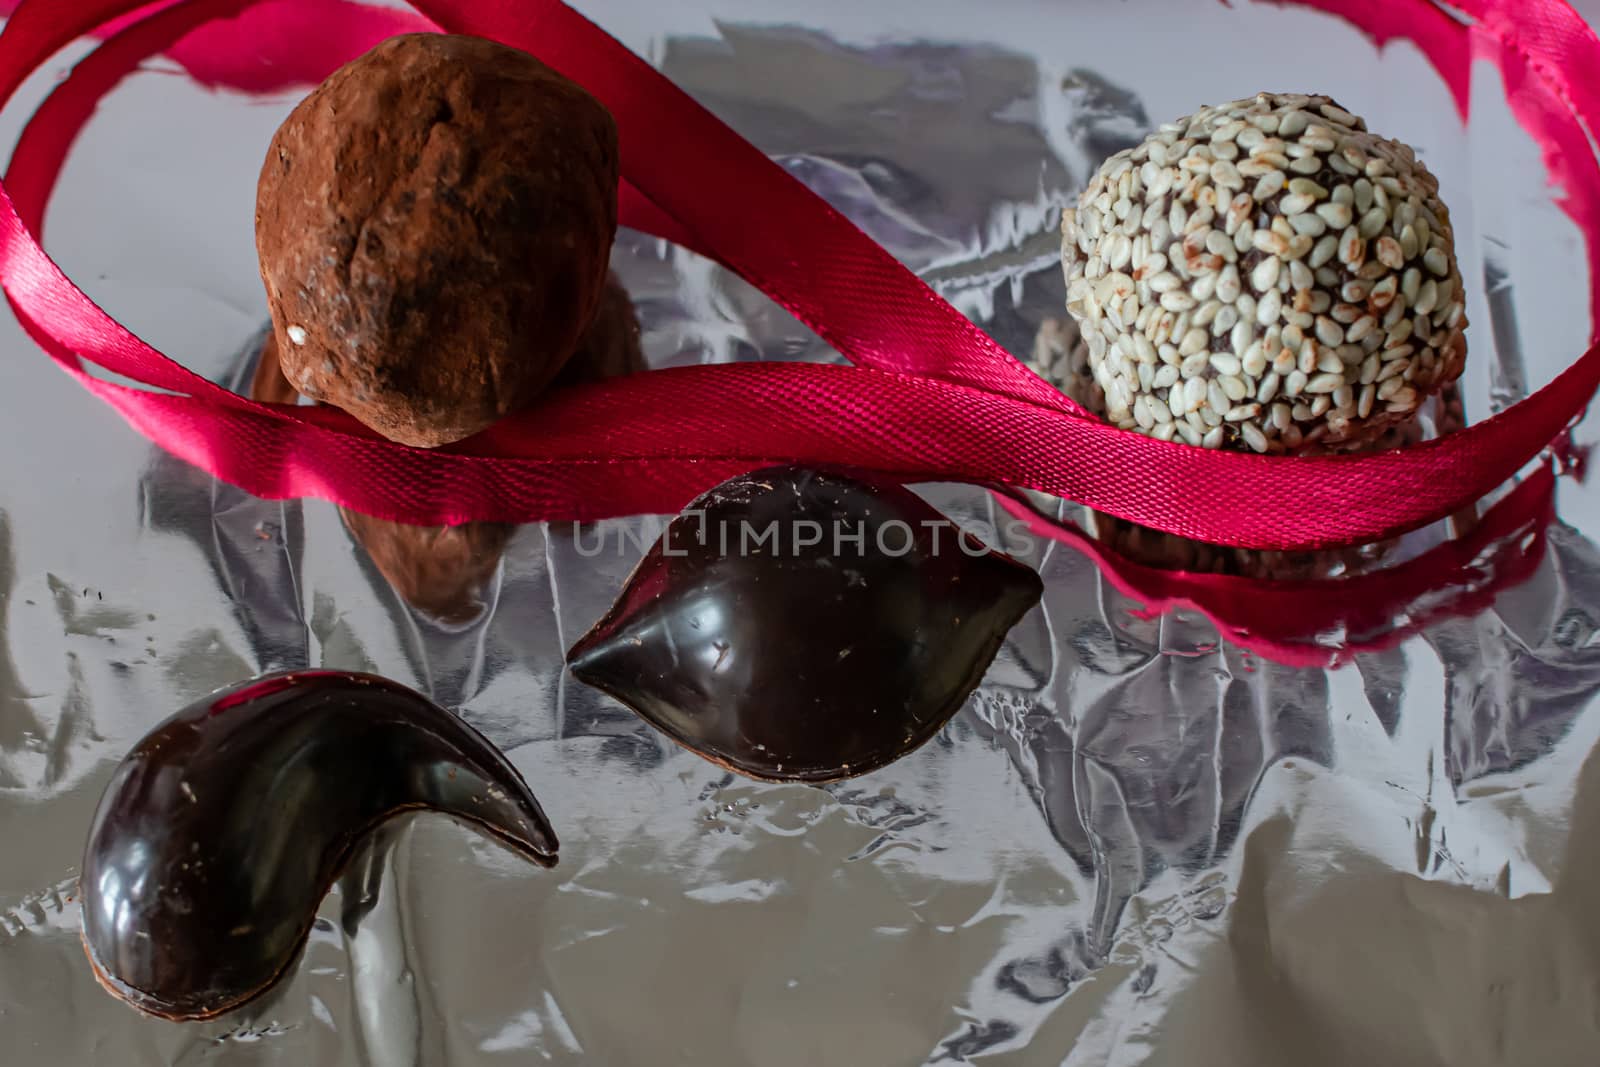 Hand-dipped, chocolate candy, also know as chocolate bon-bons, lay on a silver foil background